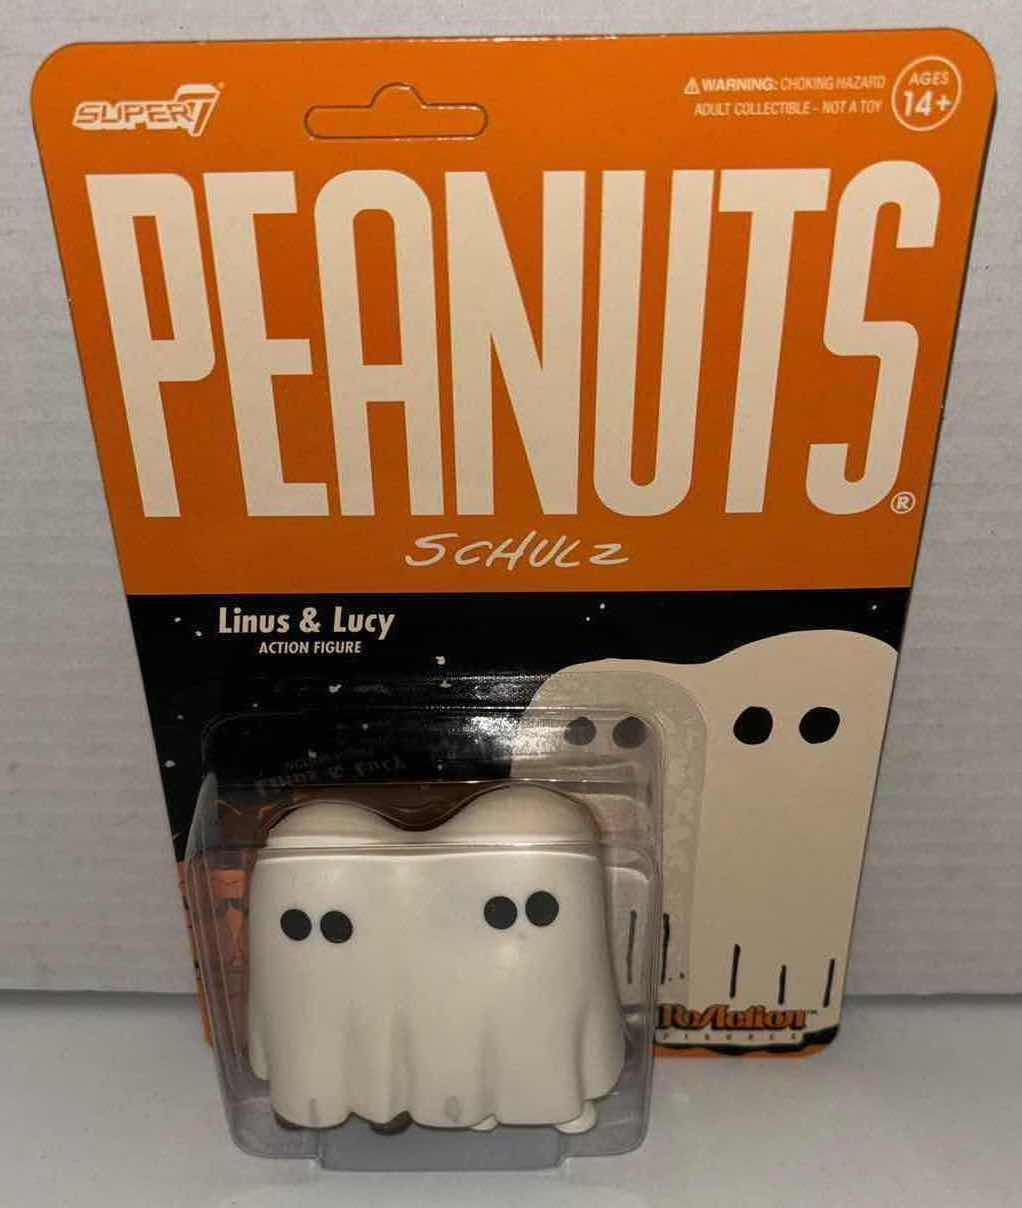 Photo 1 of BRAND NEW SUPER7 REACTION FIGURES PEANUTS “LINUS & LUCY”, OCTOBER 31 1957